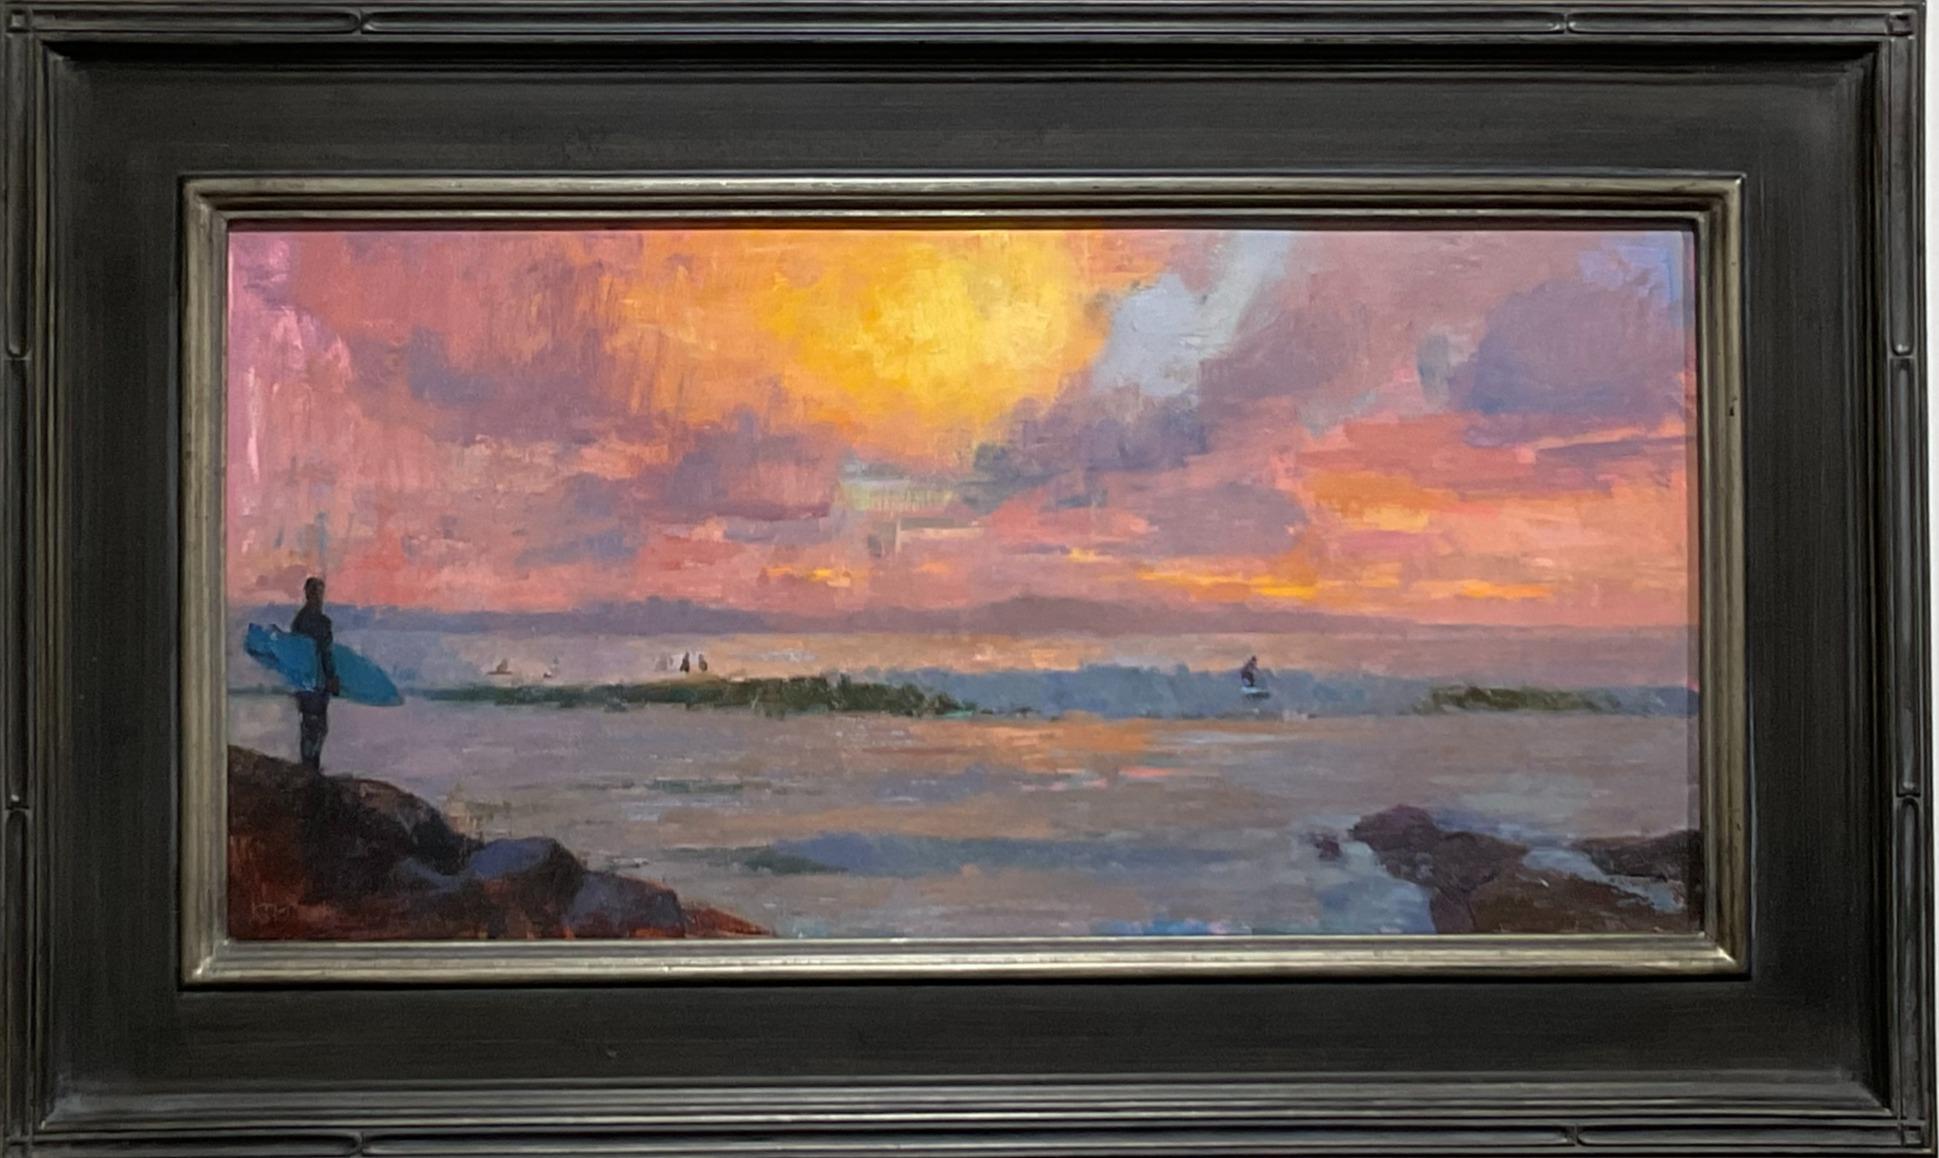 Kristian Matthews Landscape Painting - "Sunset Surfing" Plein Air Oil Painting of Surfers Catching Waves during Sunset